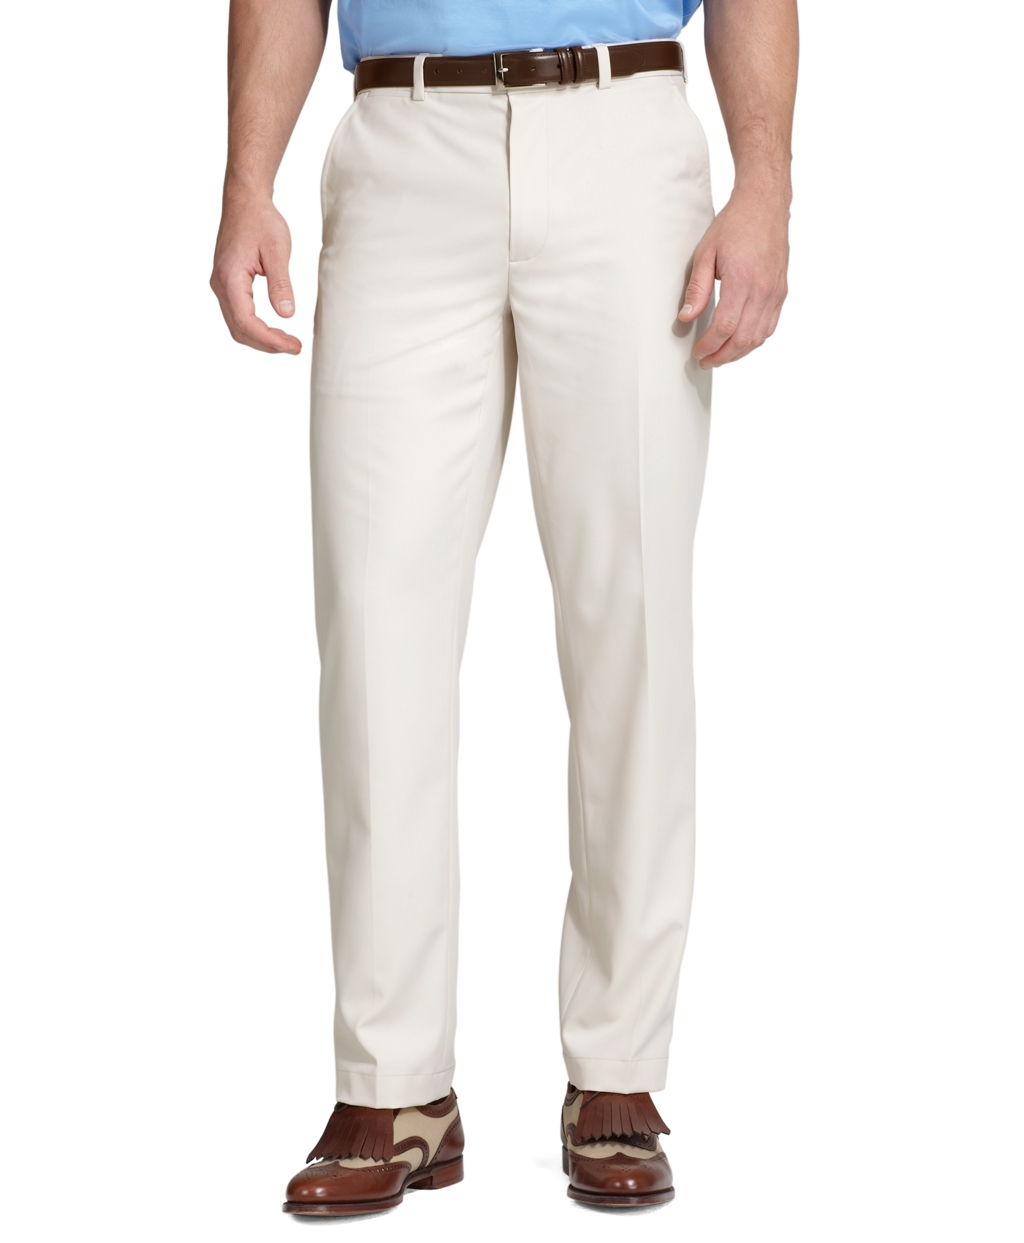 Lyst - Brooks Brothers St Andrews Links Plain-Front Golf Pants in ...